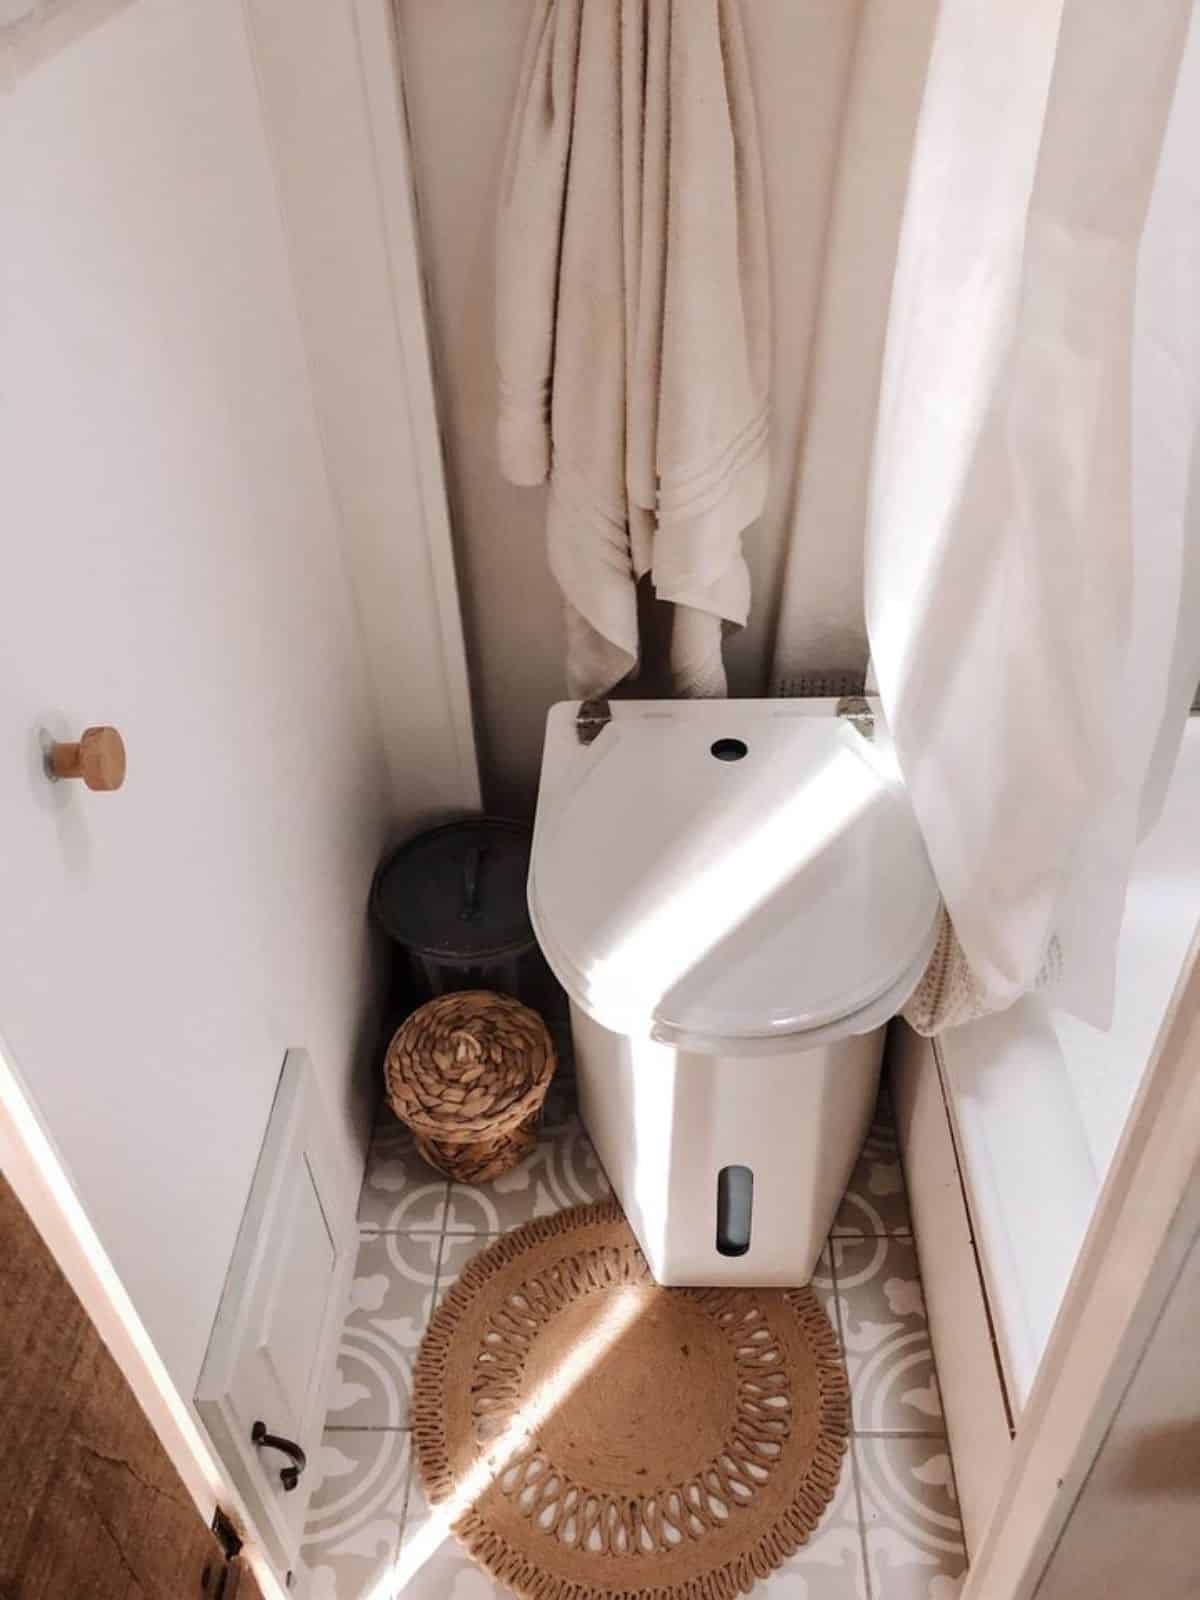 composting toilet in bathroom of the house